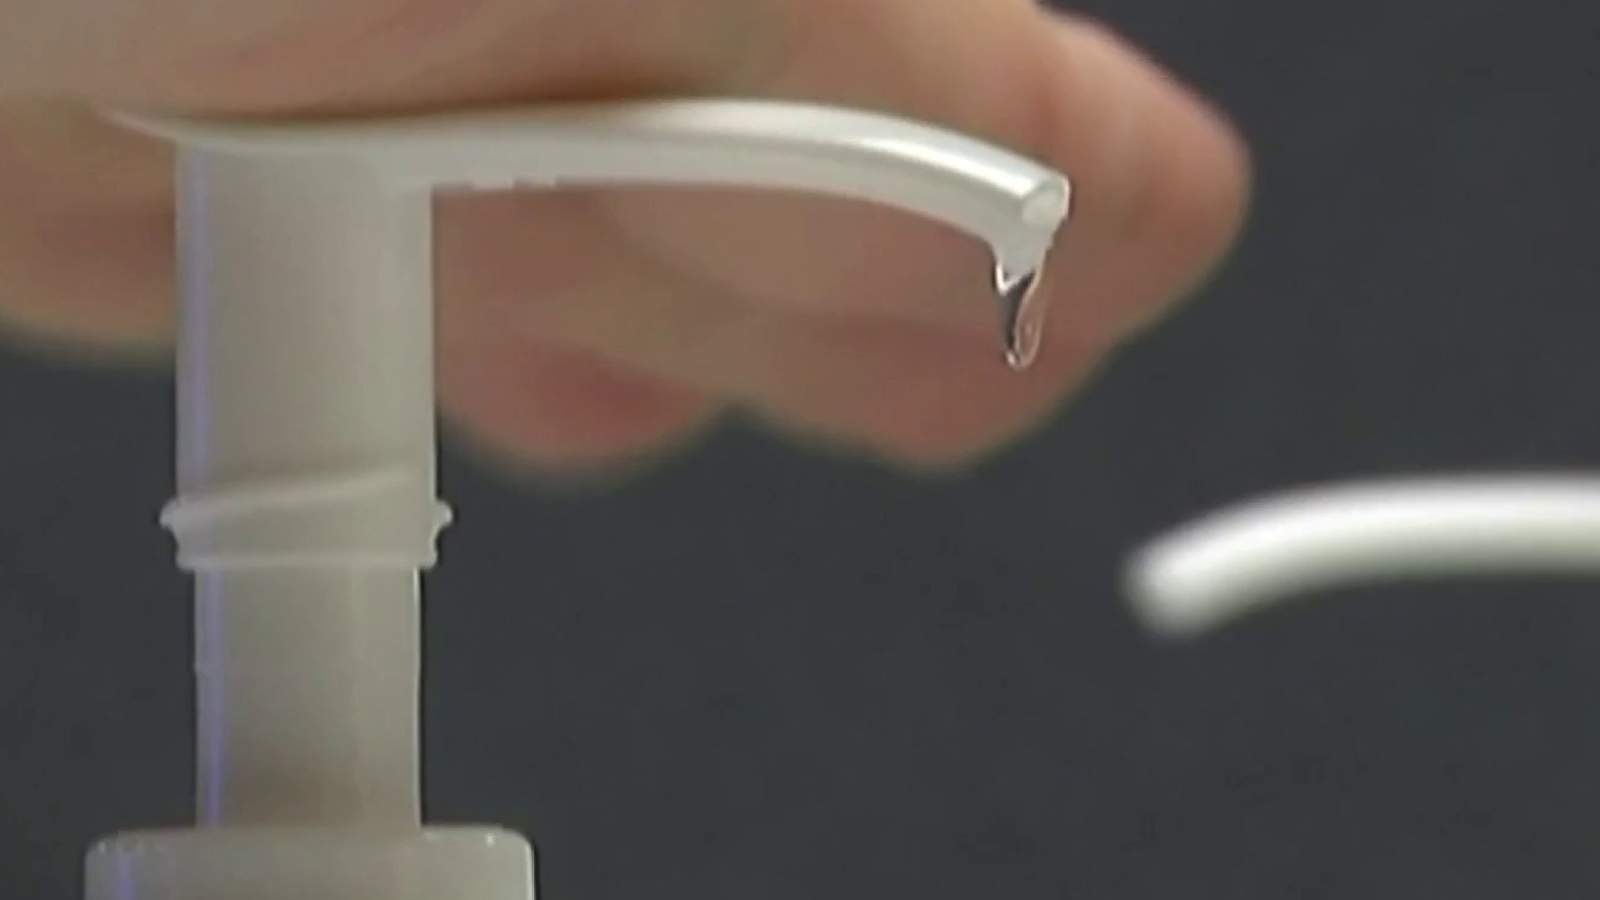 Blue Ridge Poison Center warns of potentially toxic chemical in hand sanitizer